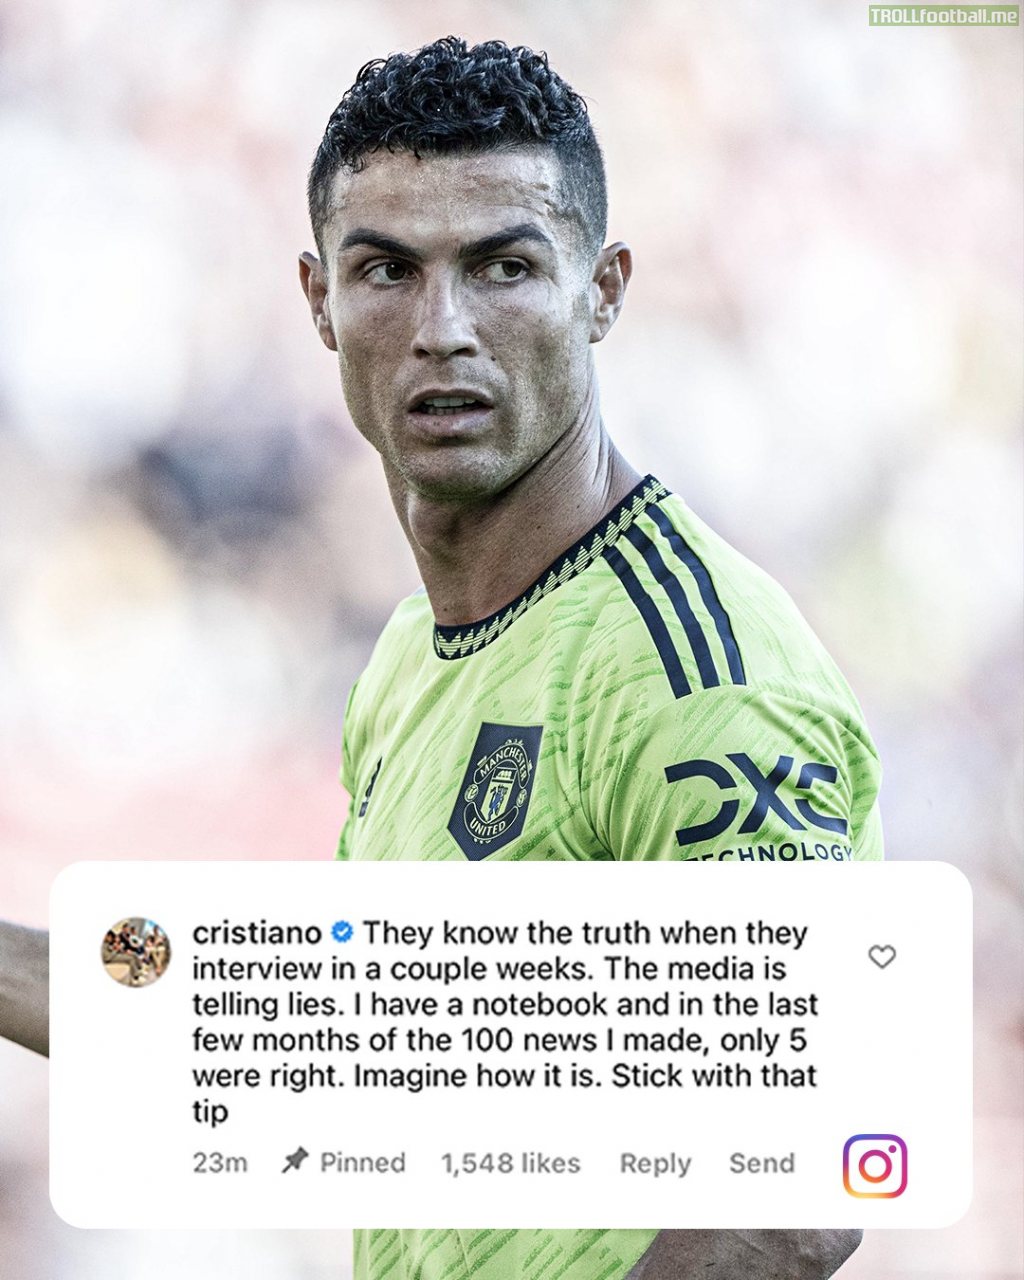 "The media is telling lies." - Cristiano Ronaldo on Instagram